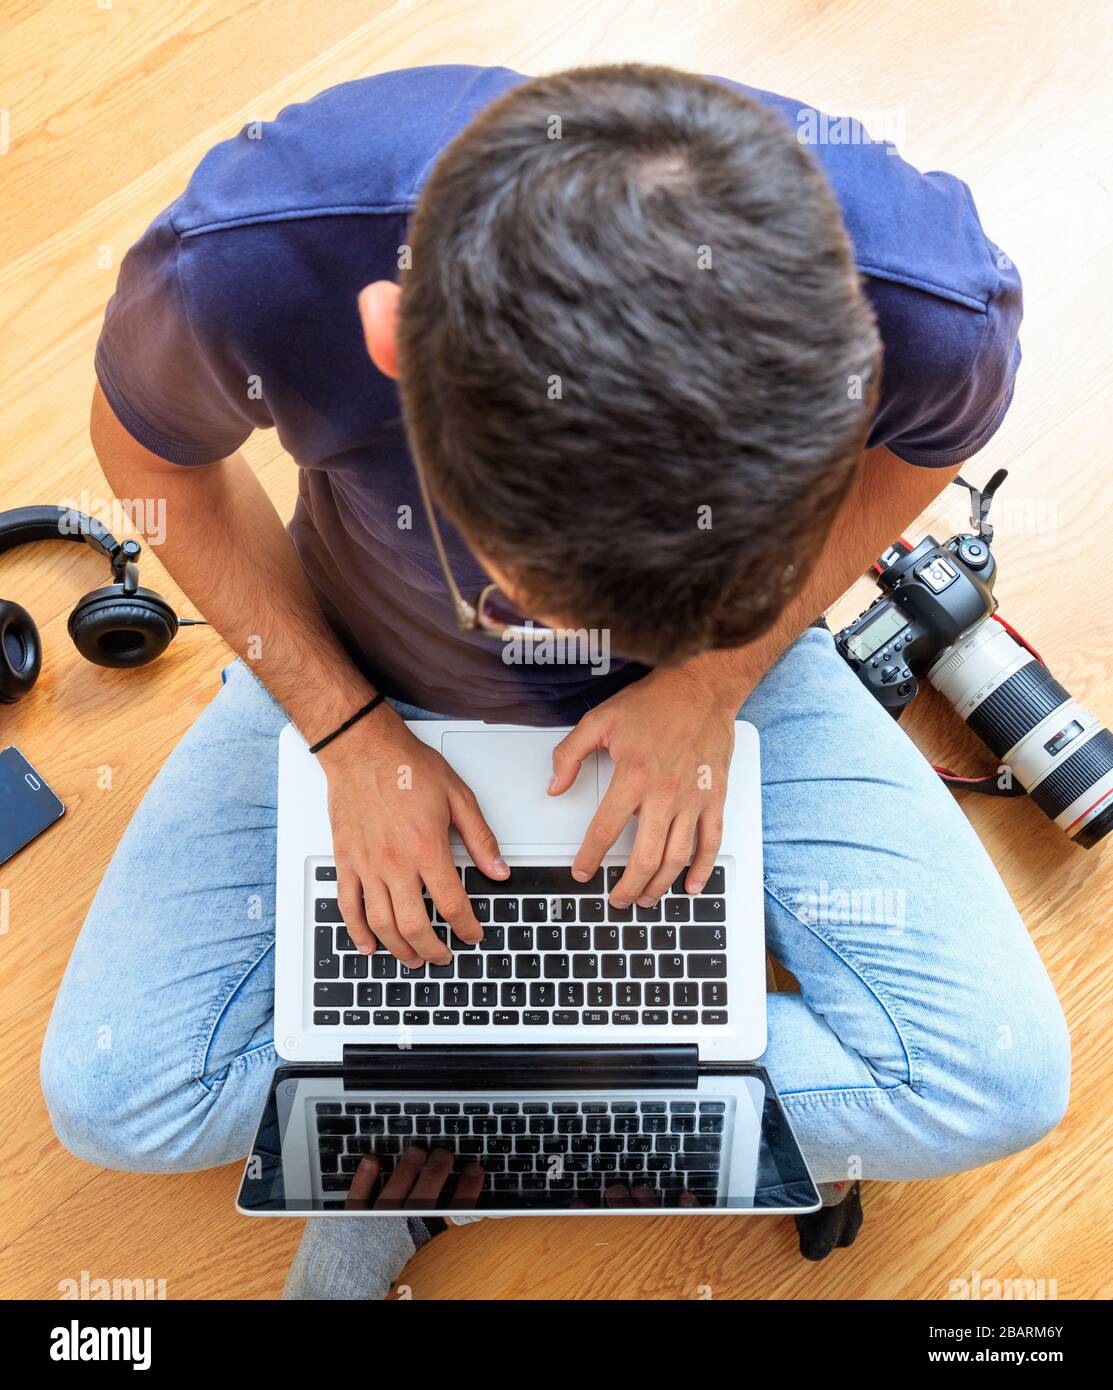 Home office, remote work. Young man working with a computer laptop. Telecommute, teleworking, work from home, making use of the Internet, email, and t Stock Photo